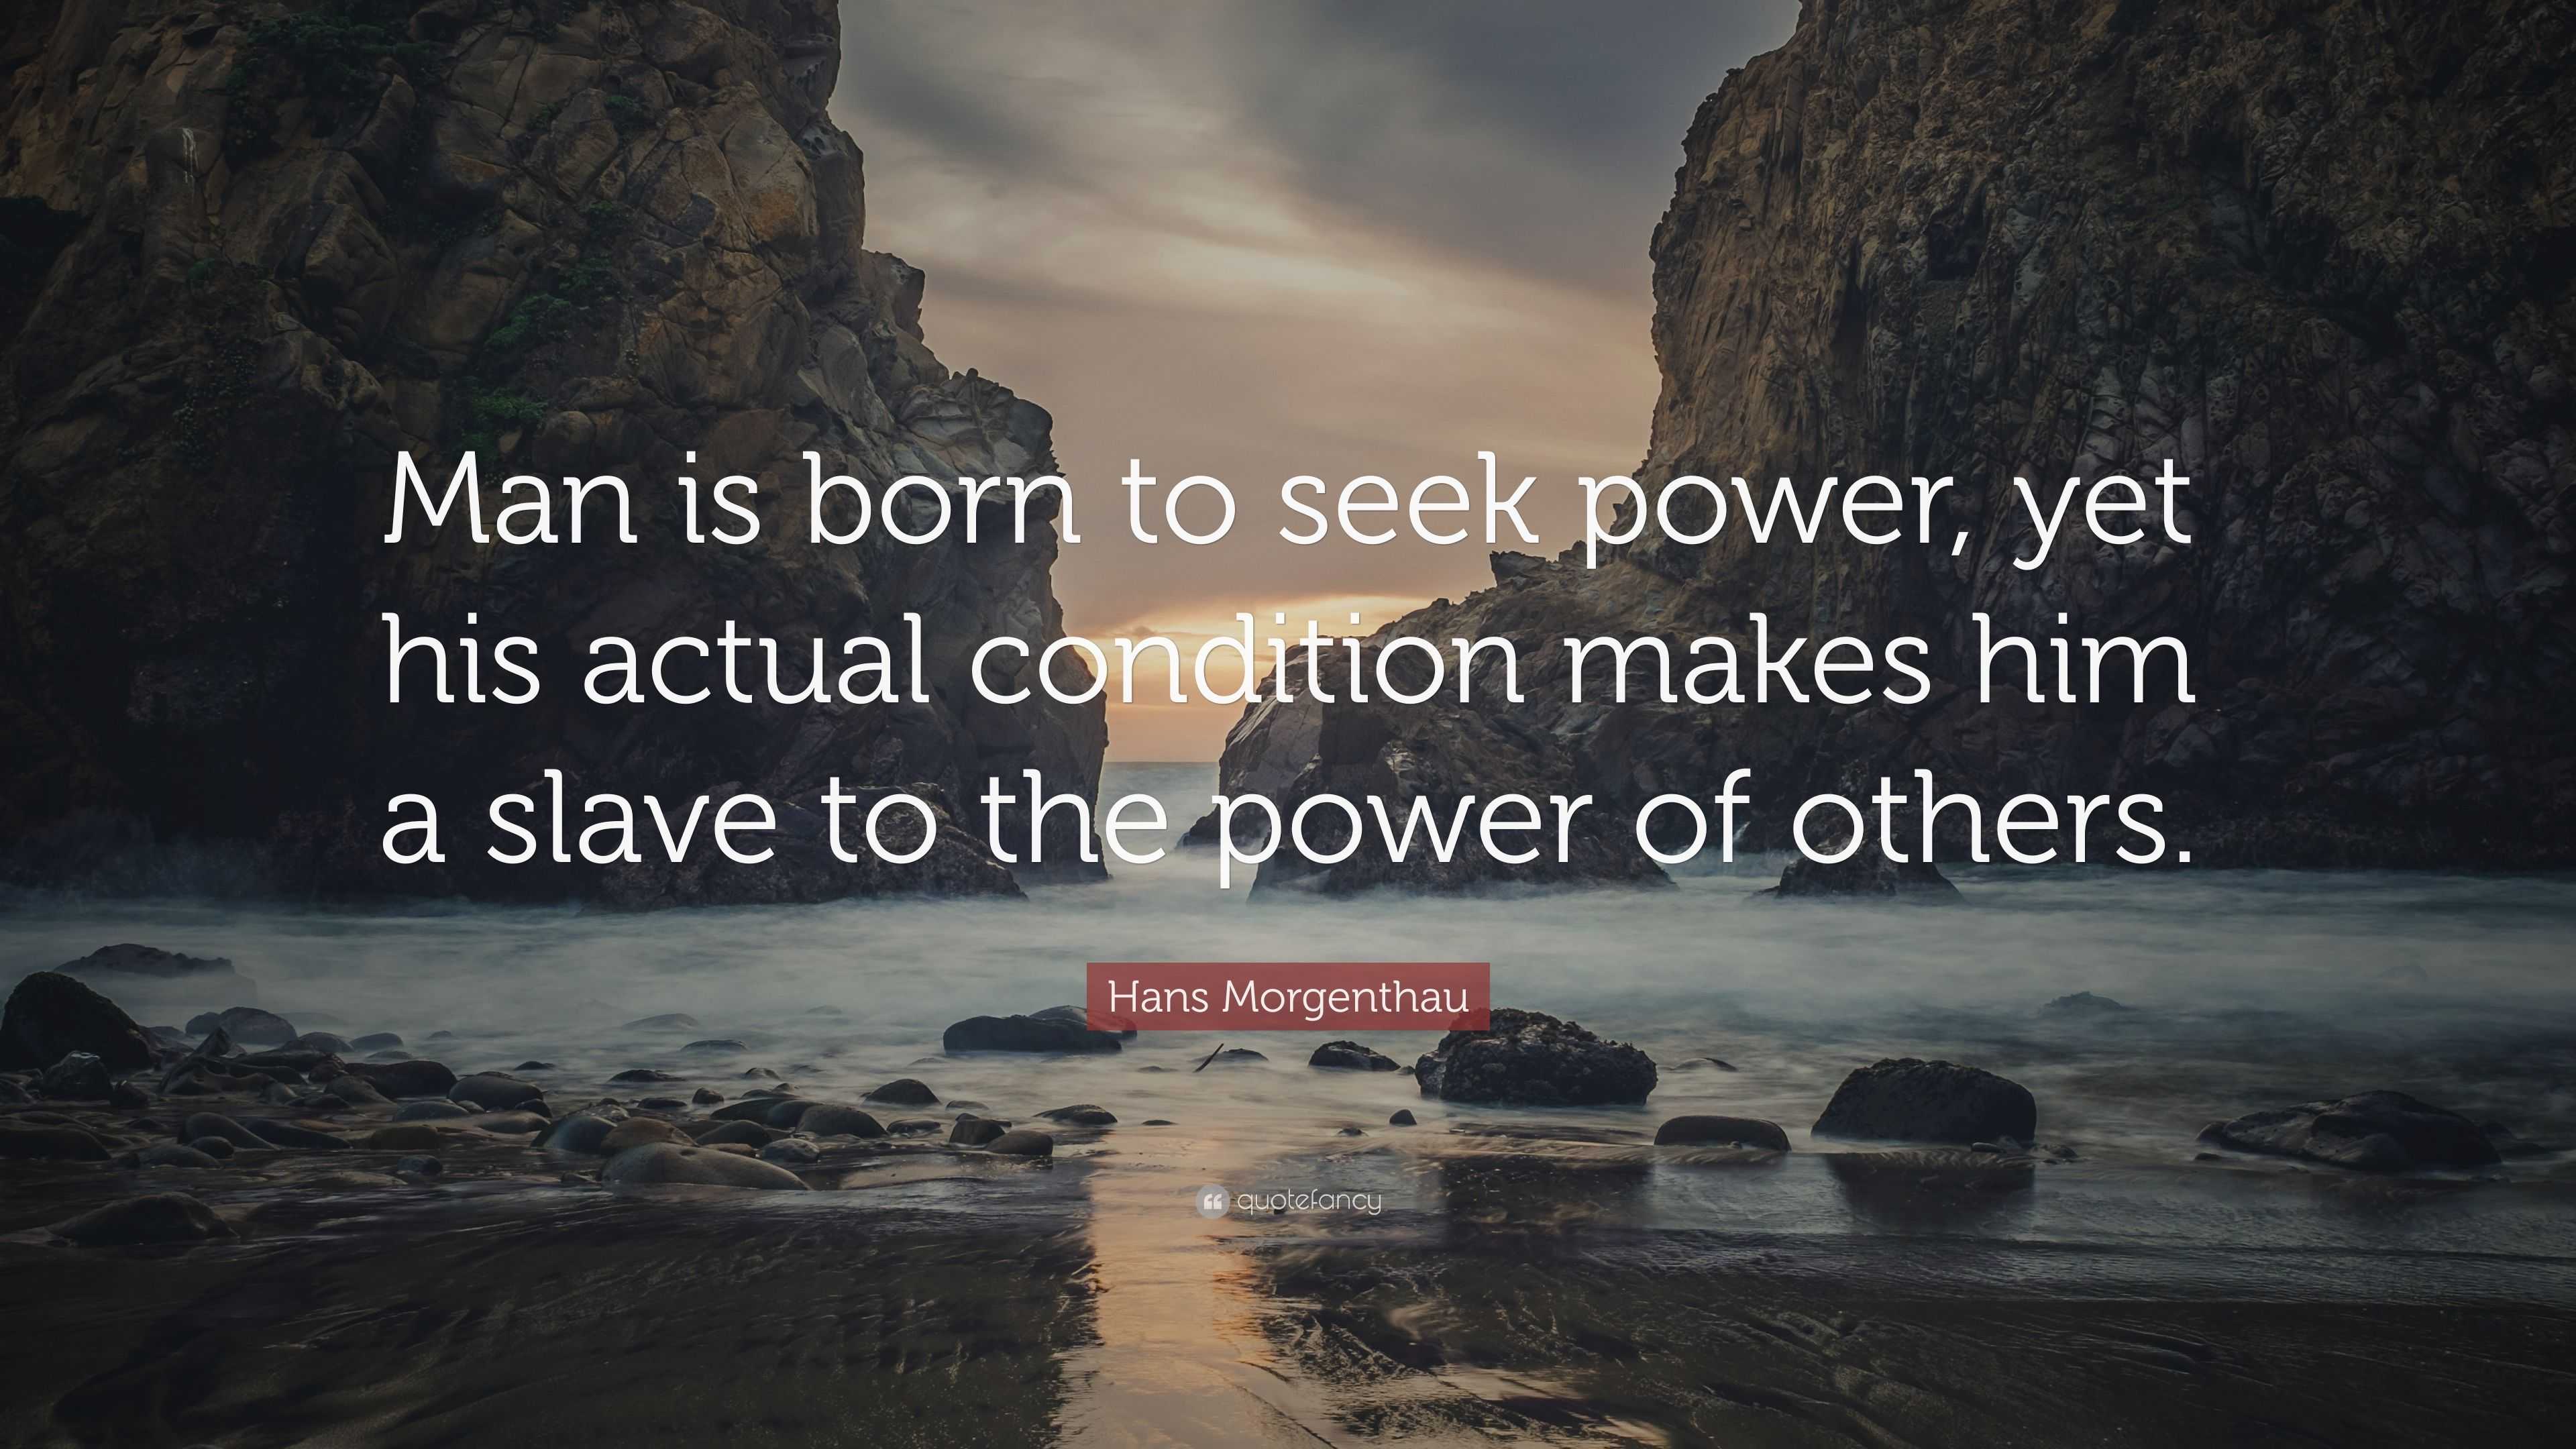 Hans Morgenthau Quote: “Man is born to seek power, yet his actual ...